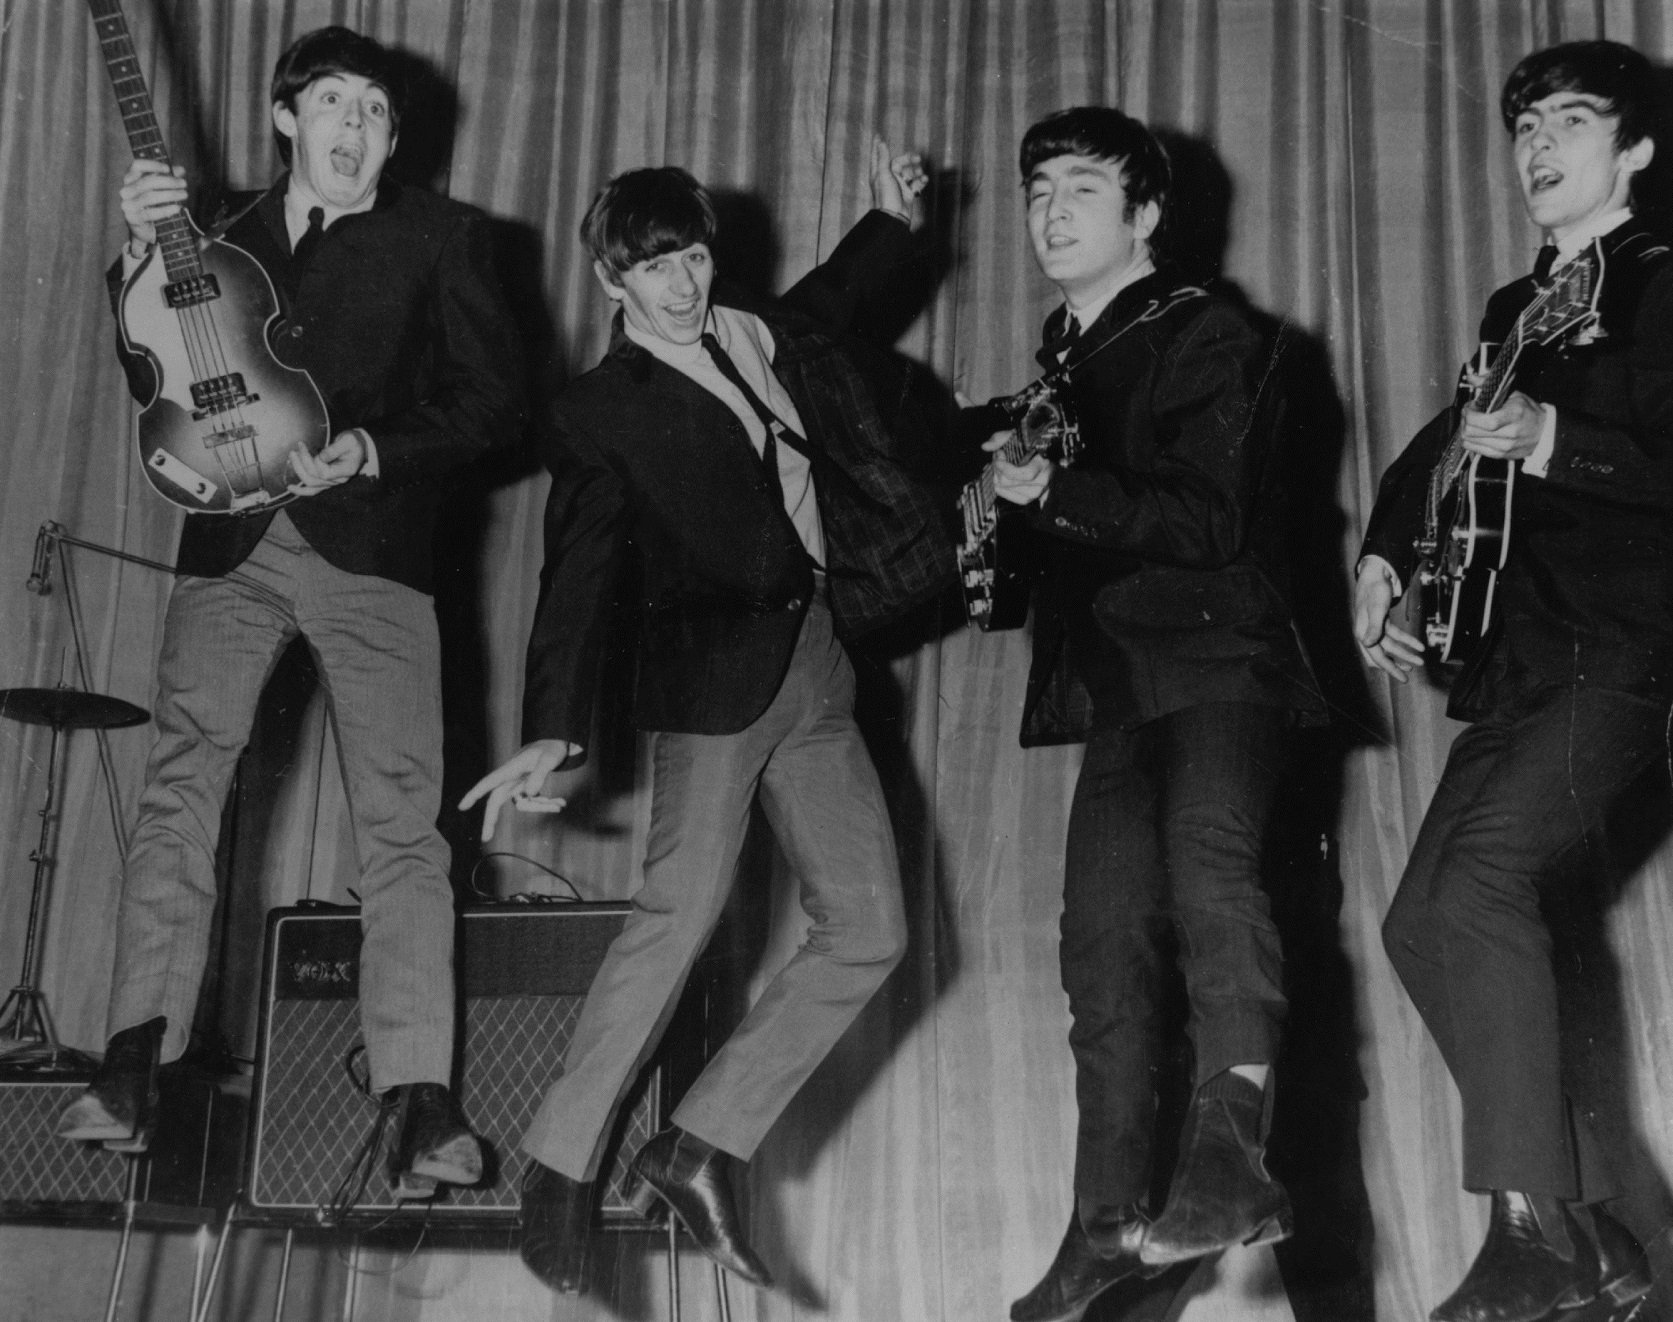 The Beatles rehearsing at the Prince of Wales Theatre for their Royal Variety Performance.